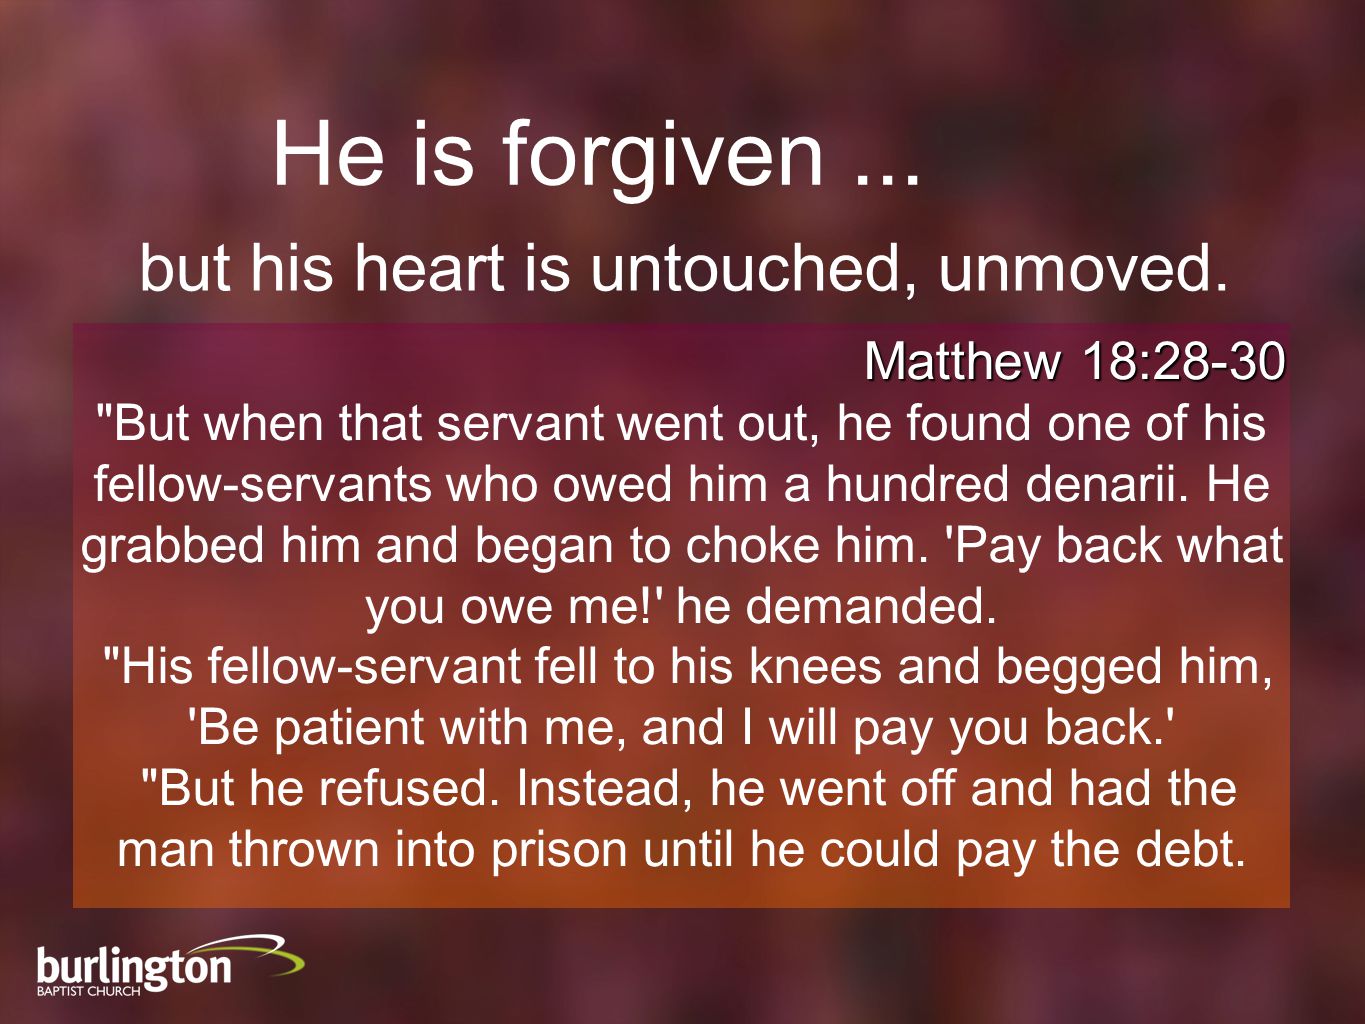 Matthew 18:28-30 But when that servant went out, he found one of his fellow-servants who owed him a hundred denarii.